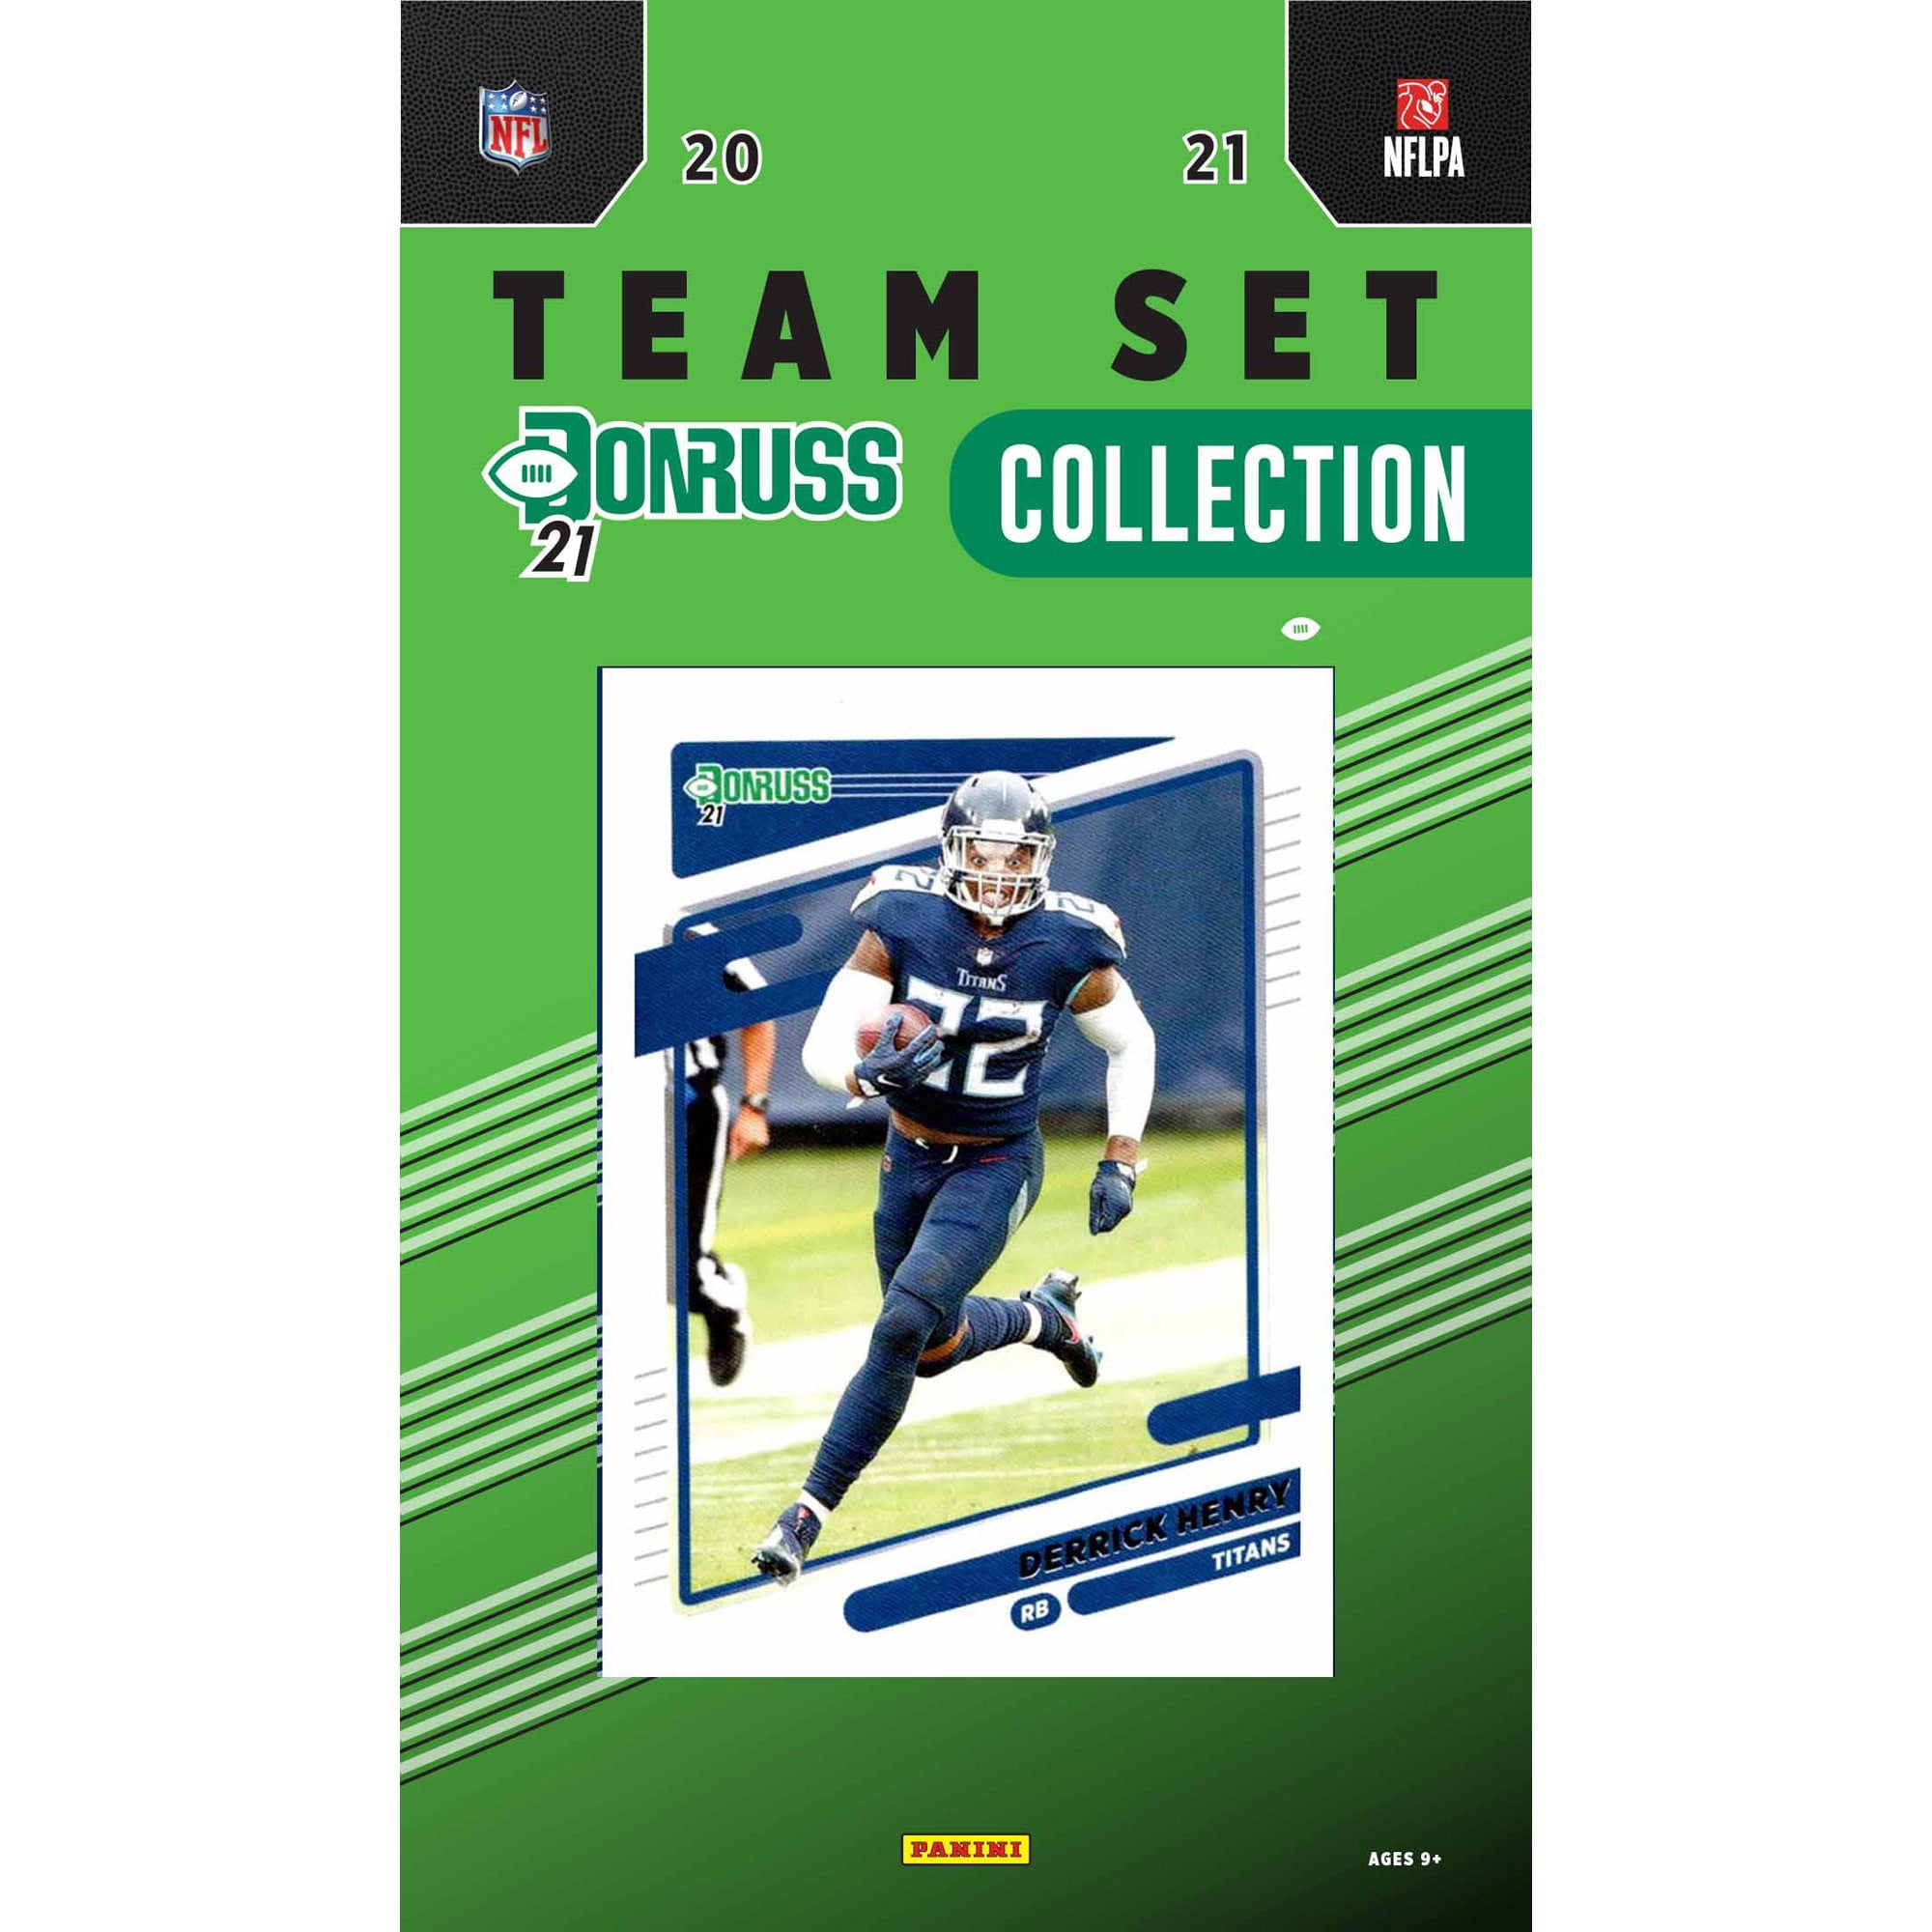 Houston Texans 2020 Donruss Factory Sealed 8 Card Team Set with Deshaun Watson and JJ Watt Plus 2 Rookie Cards and 4 Other Players